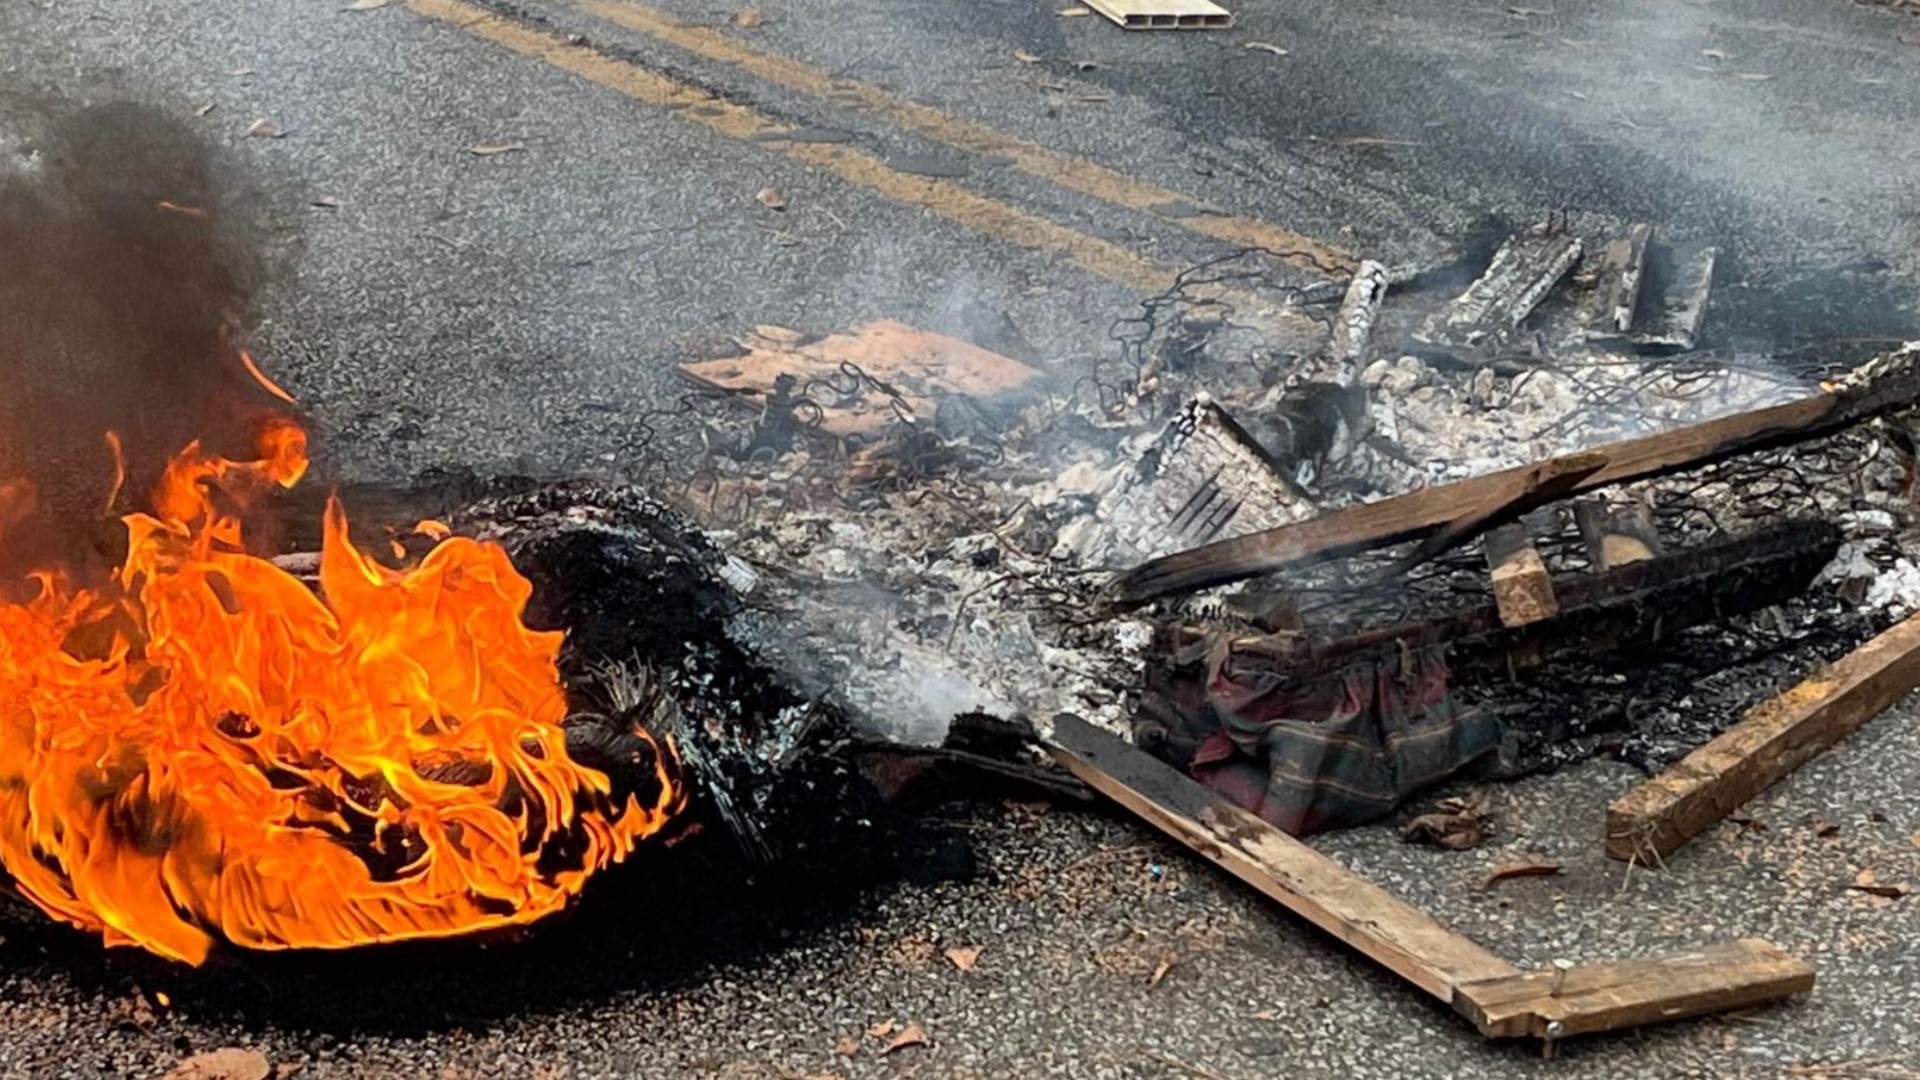 DeKalb Police Department responded to reports of a dumpster fire on Key Road around 10:32 a.m. on Saturday, assisting Atlanta Police Department.